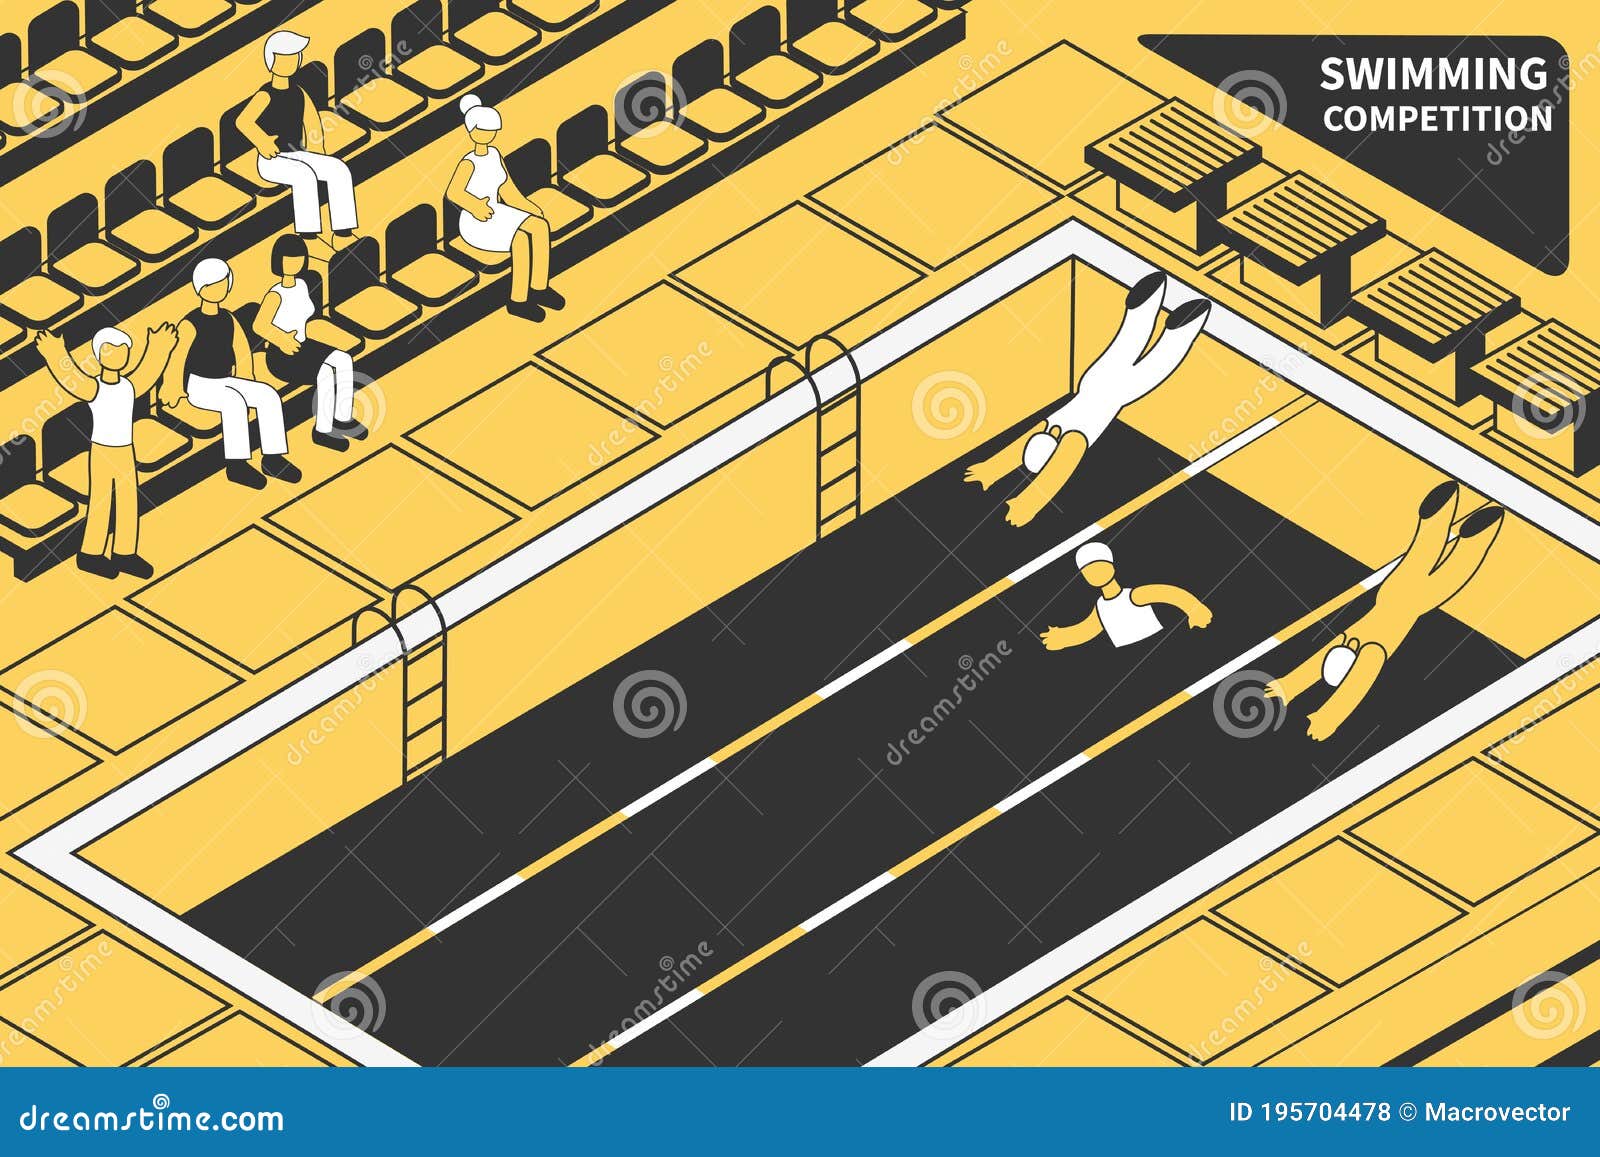 swimming competitions isometric composition